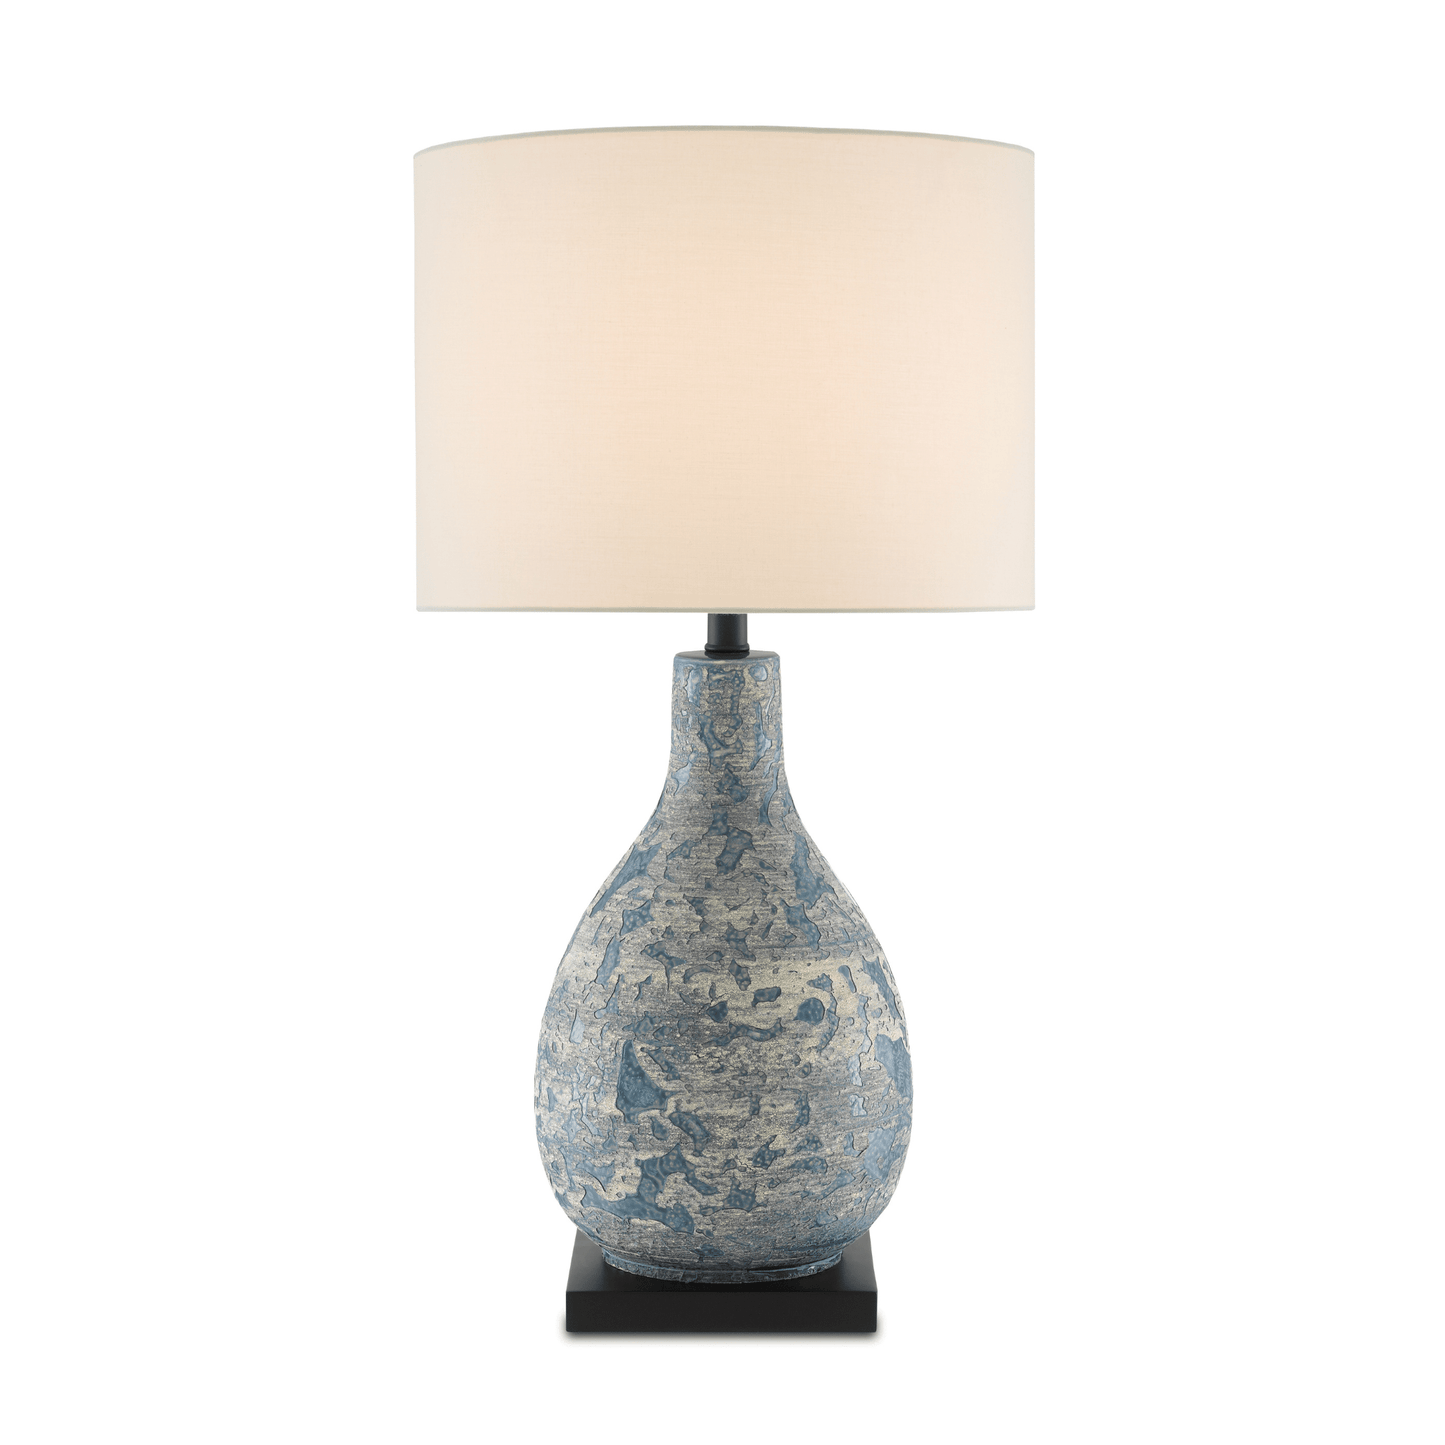 Ostracon Table Lamp H: 28.5" Dia: 15"